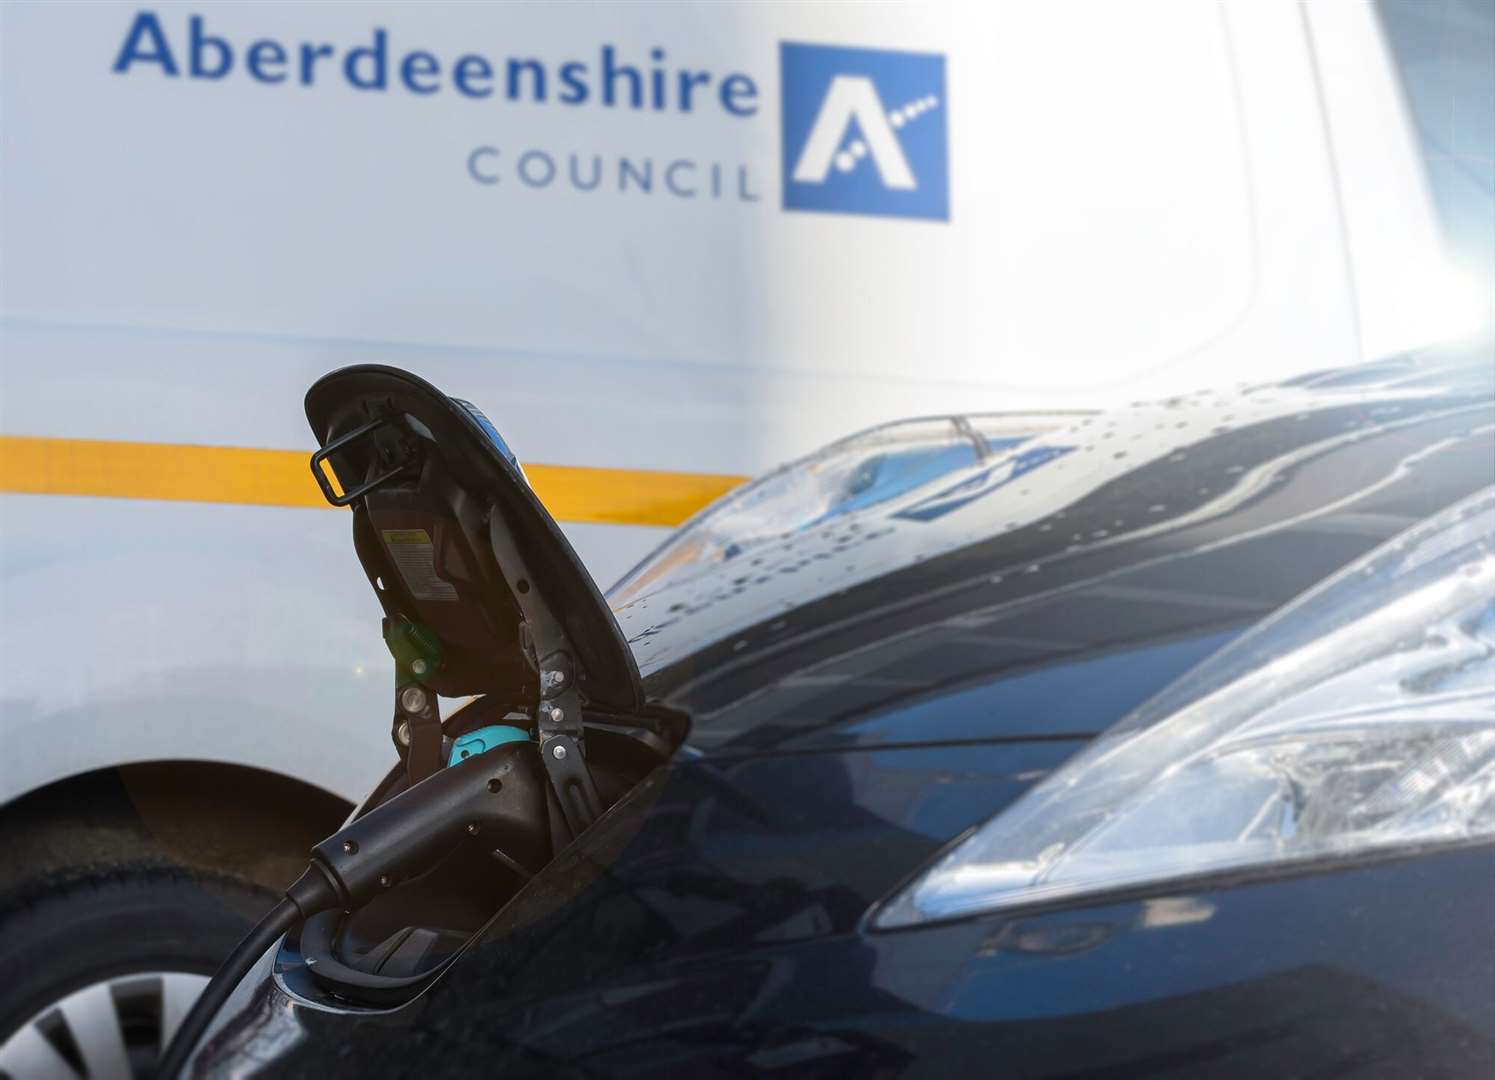 Aberdeenshire Council beat its decarbonisation target for the 2022/23 financial year by more than a thousand tonnes of carbon dioxide equivalent.